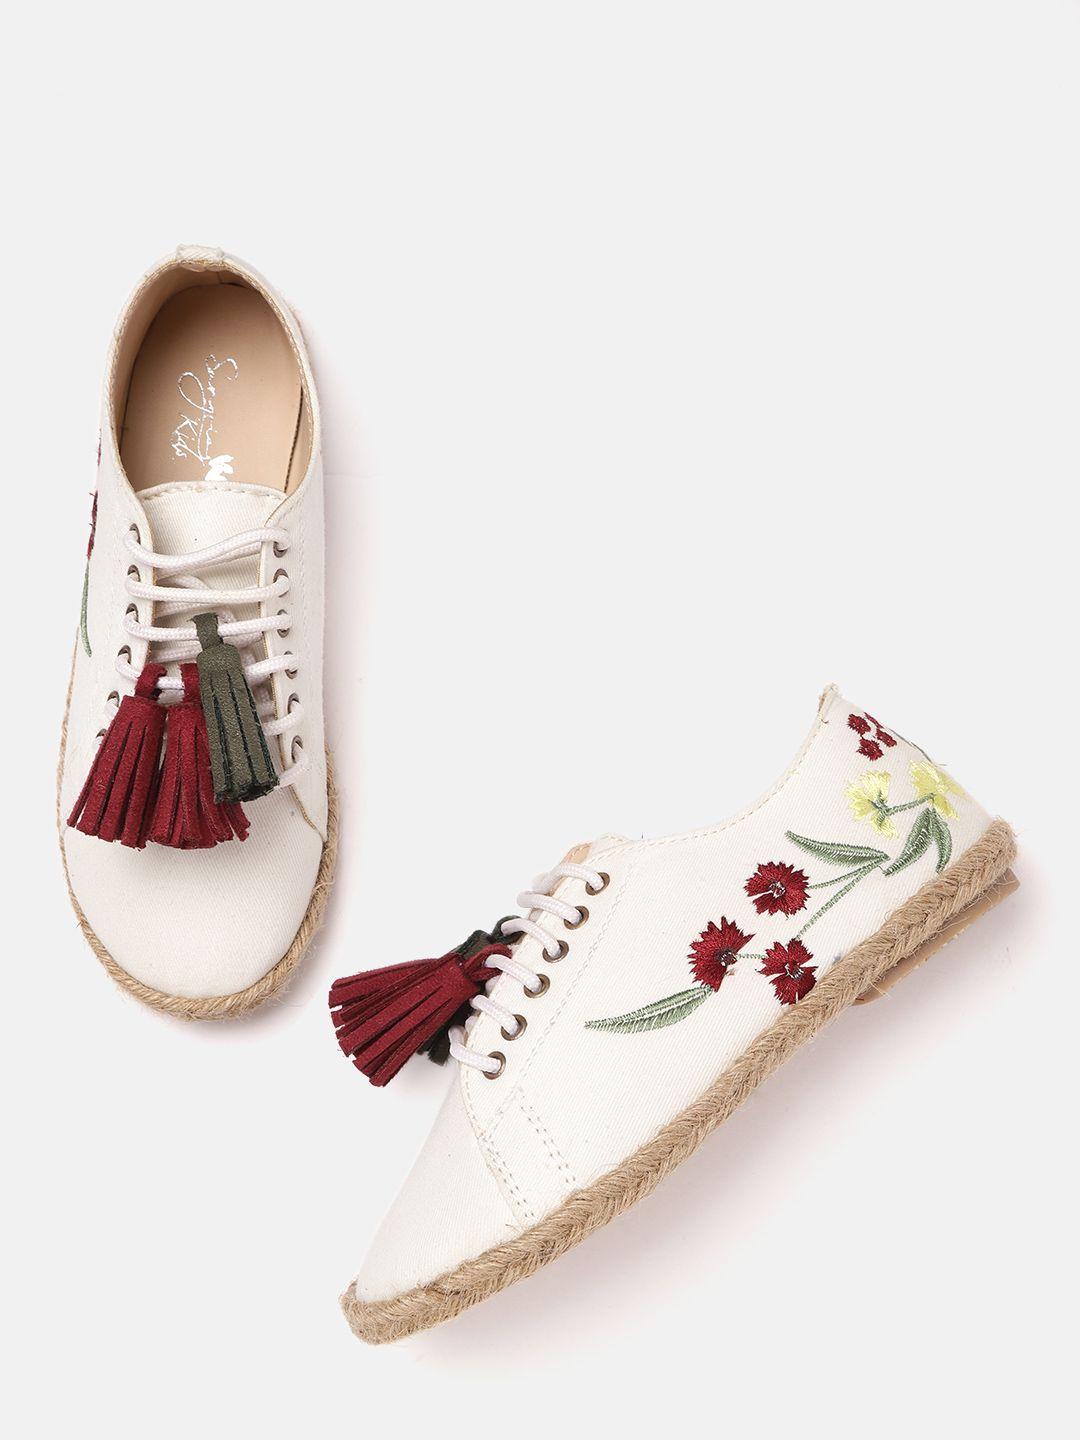 sangria girls white & maroon embroidered espadrilles with tasseled detail